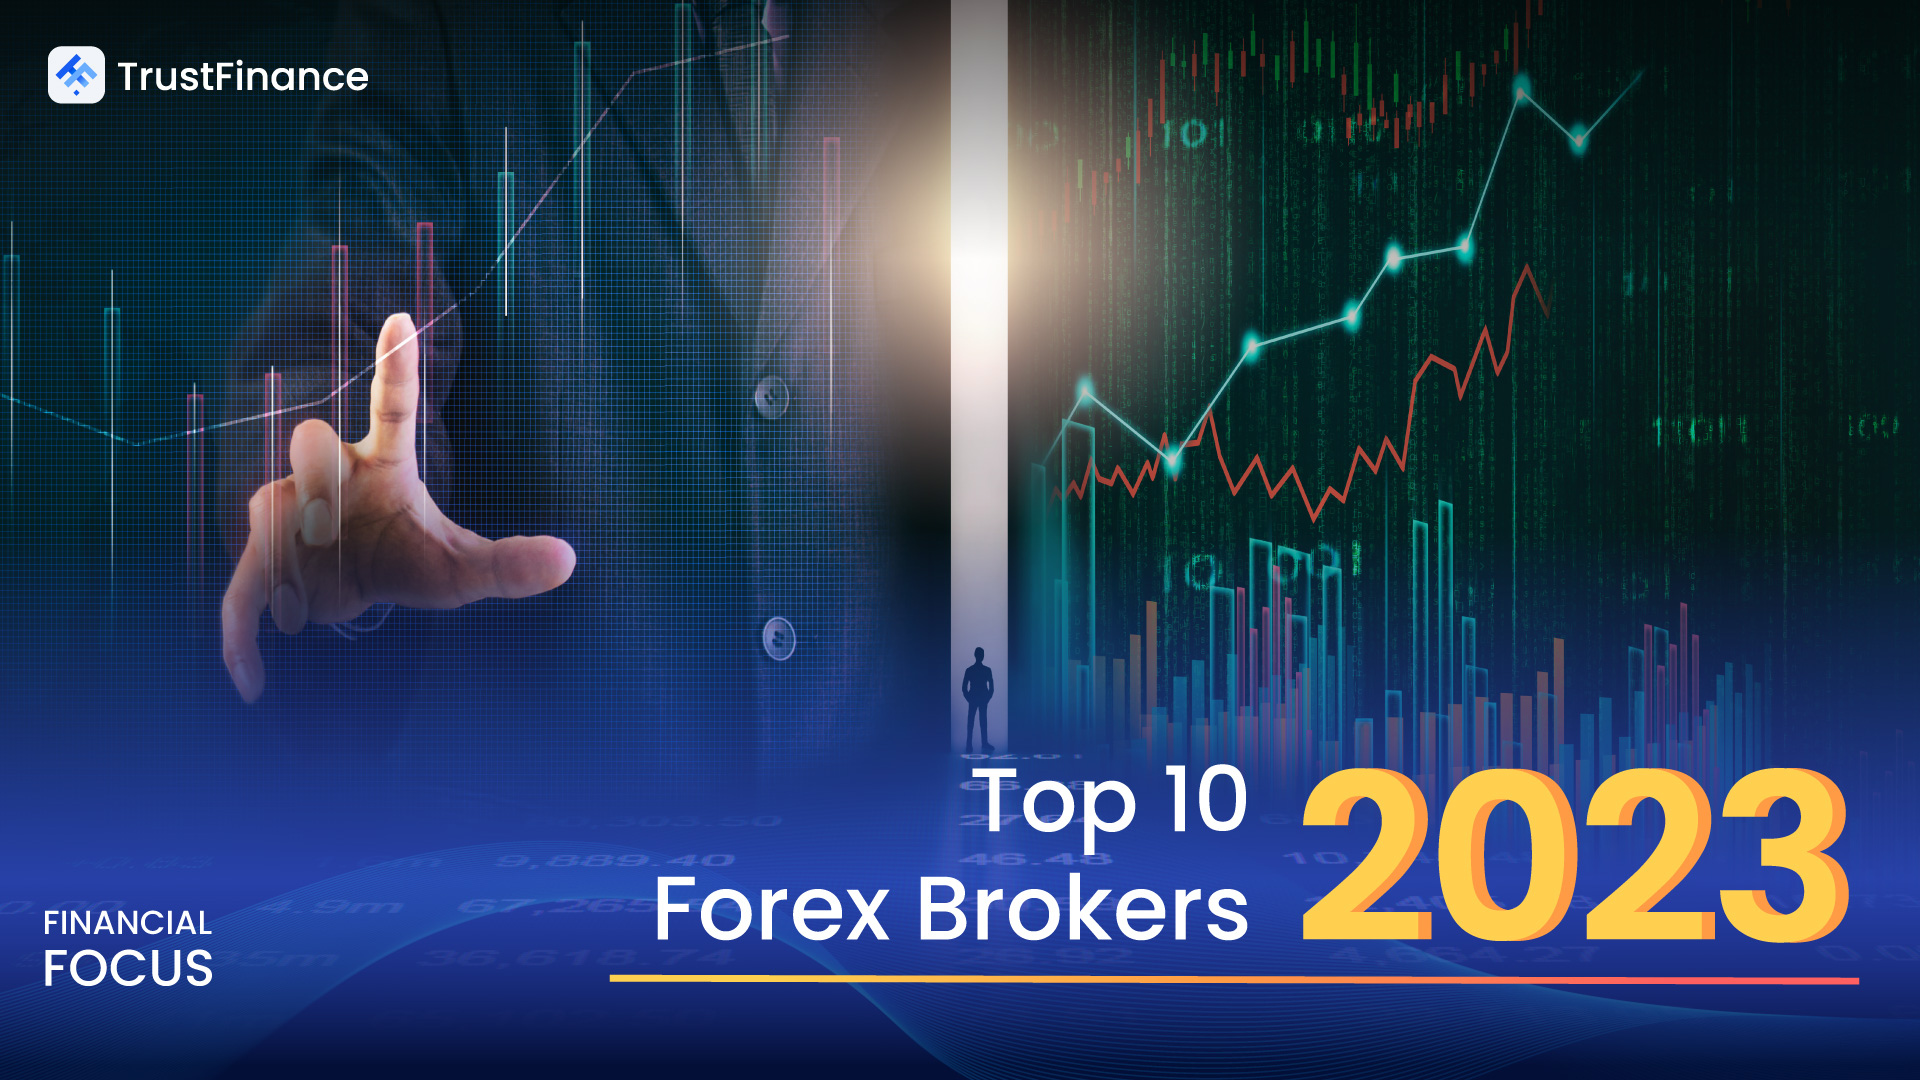 Forex Brokers Review 2023: Top 10 Forex Brokers for 2023